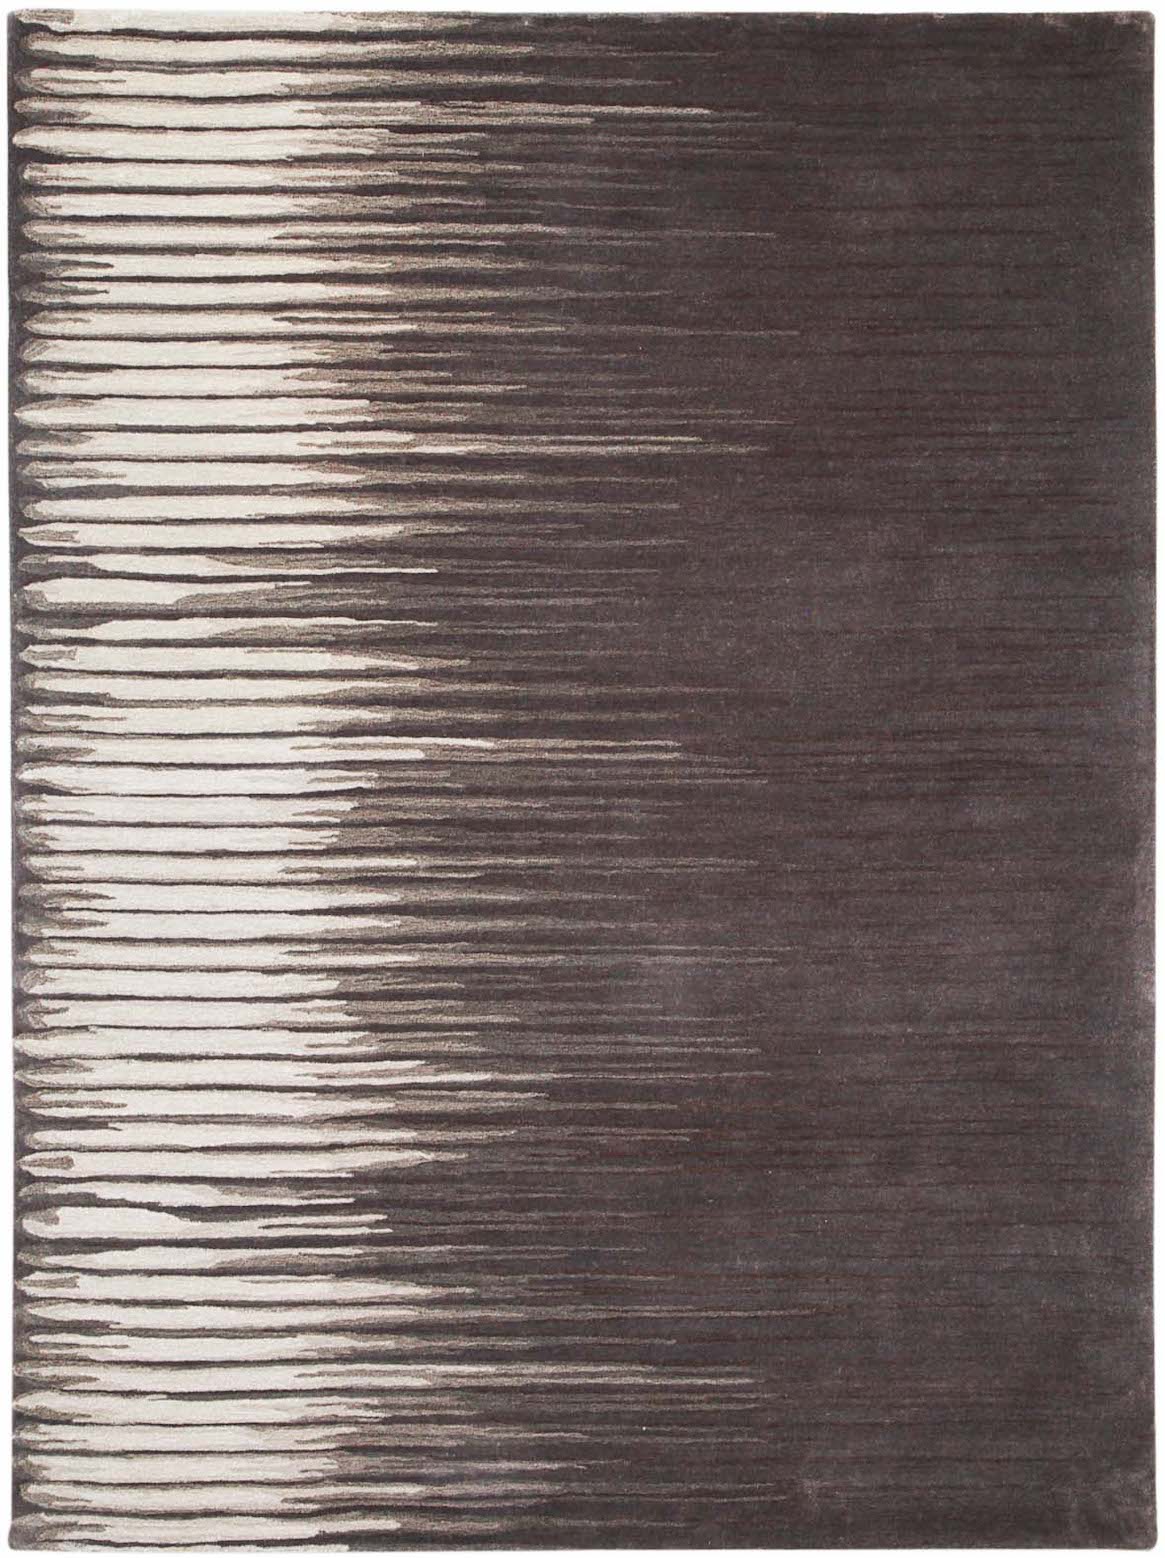 TRANQUIL Beige Charcoal